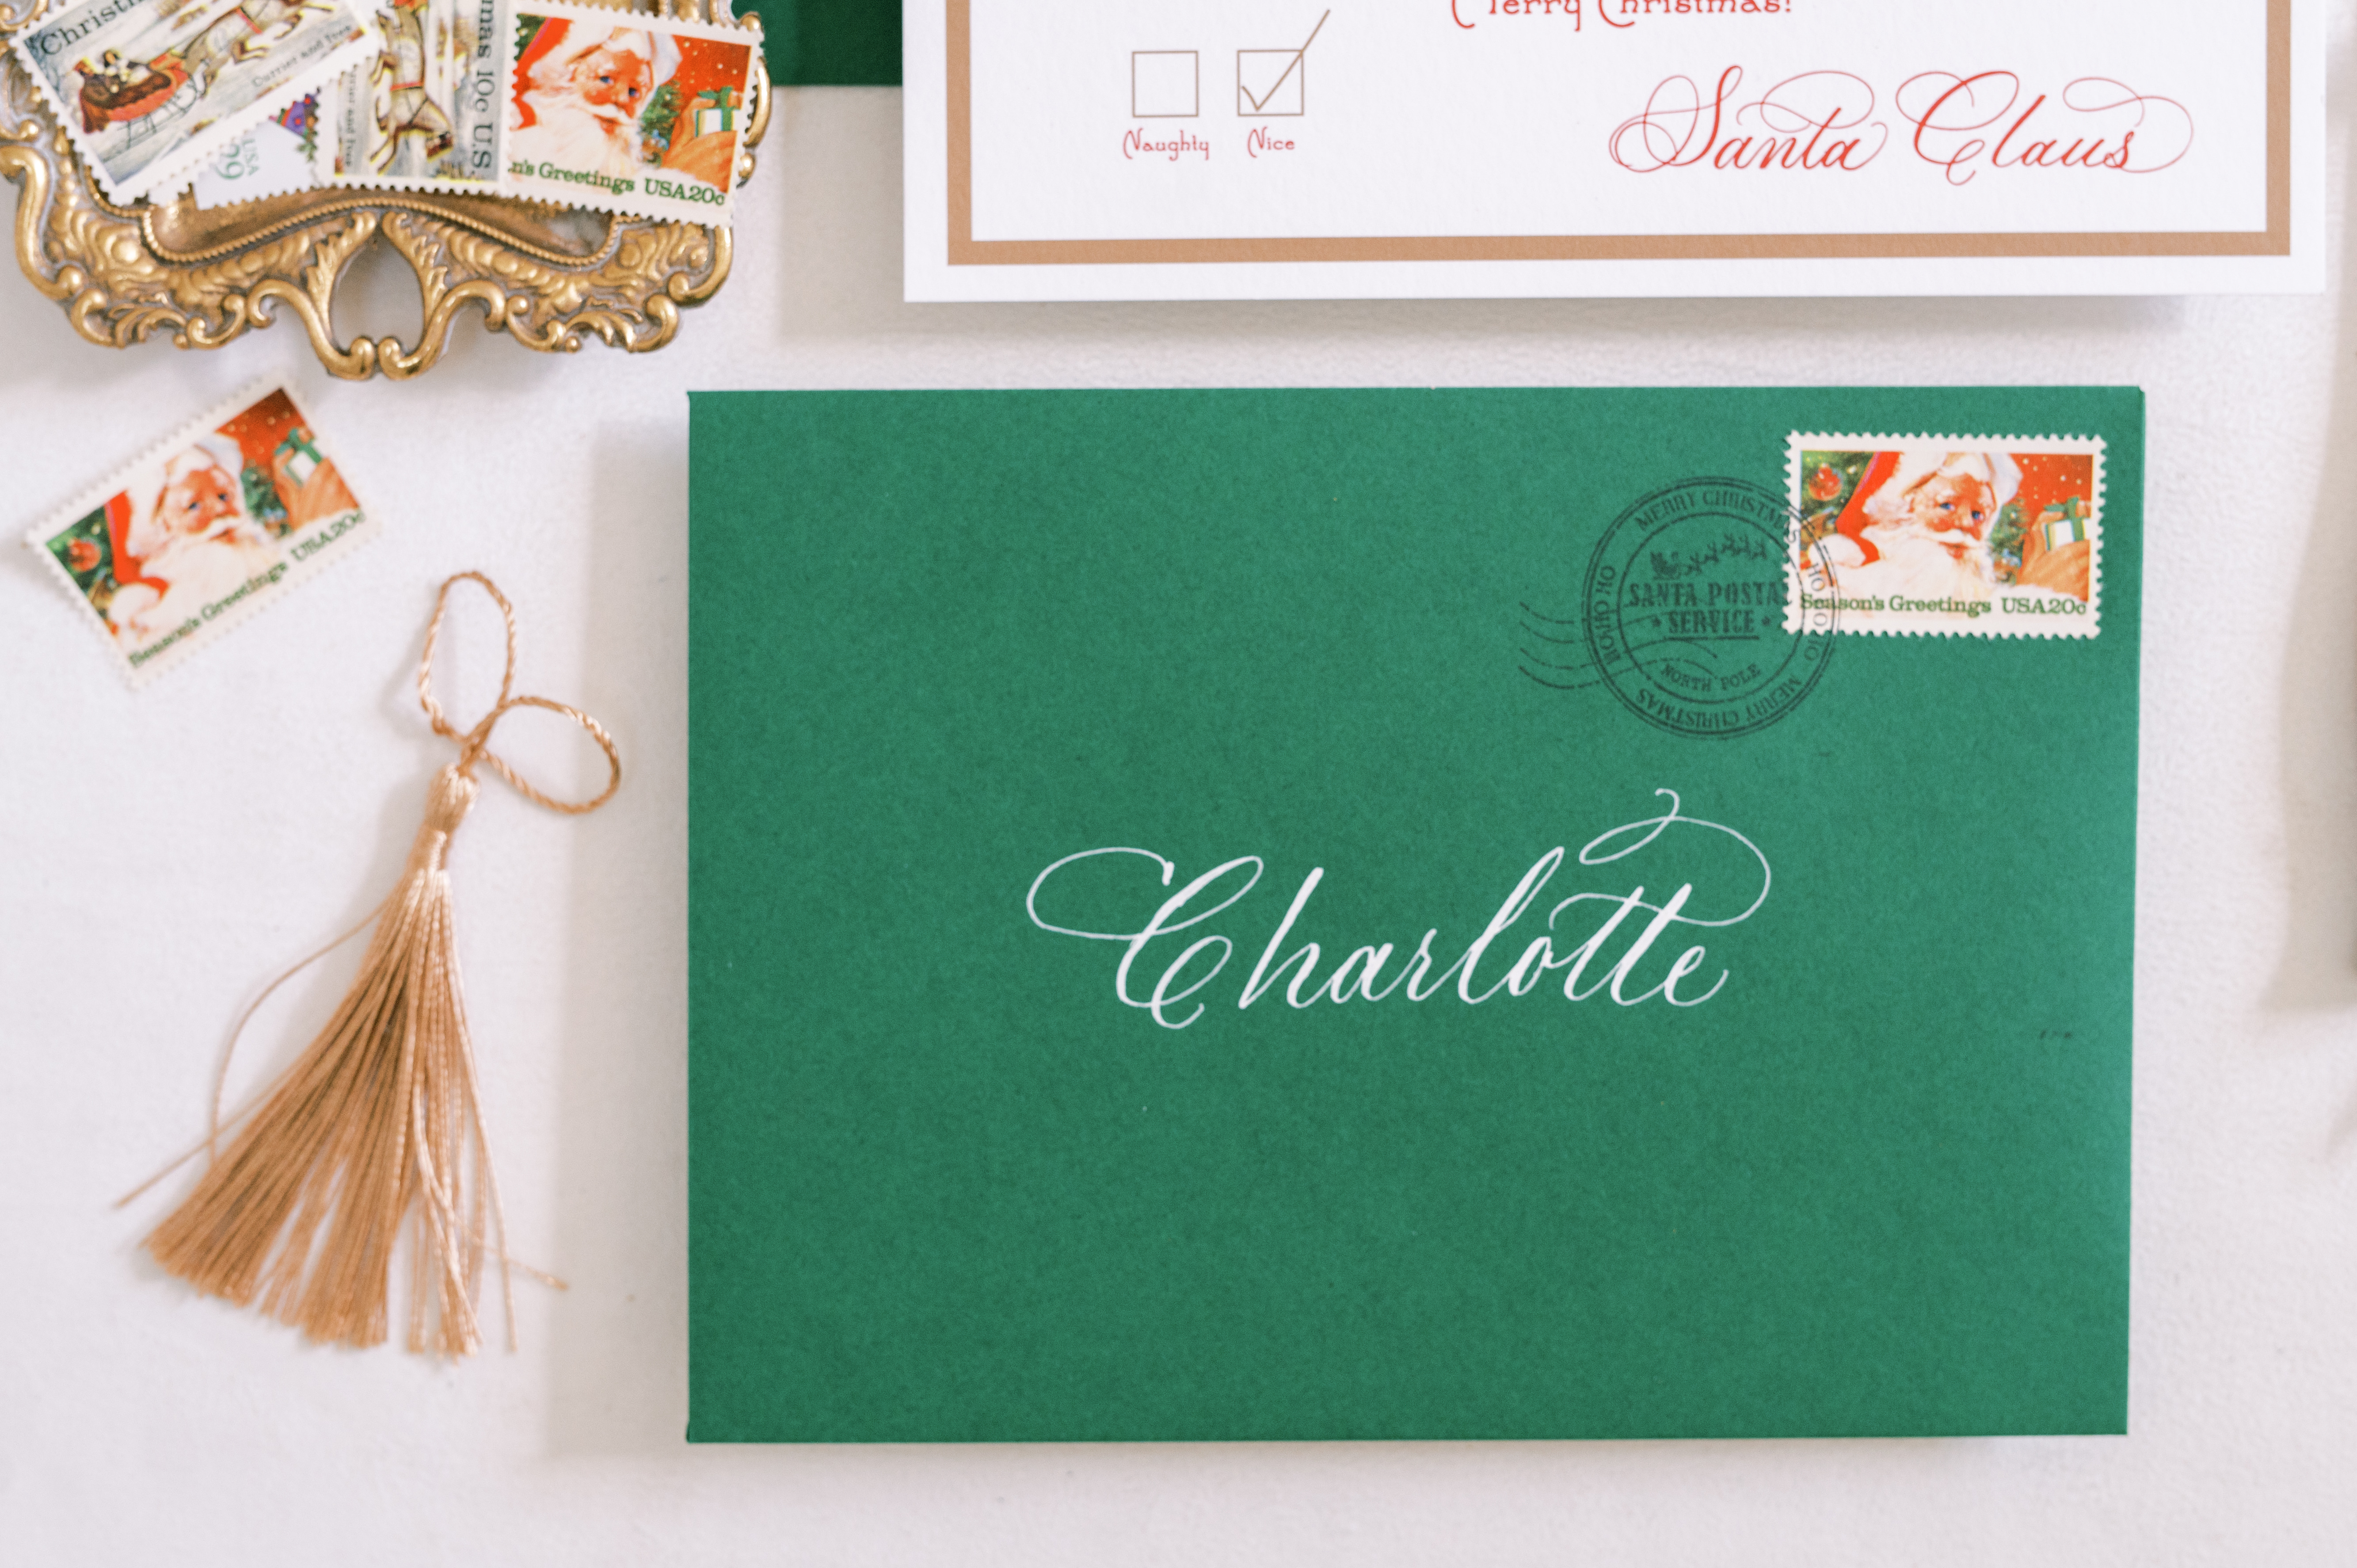 Green envelope with calligraphy and vintage holiday stamp.